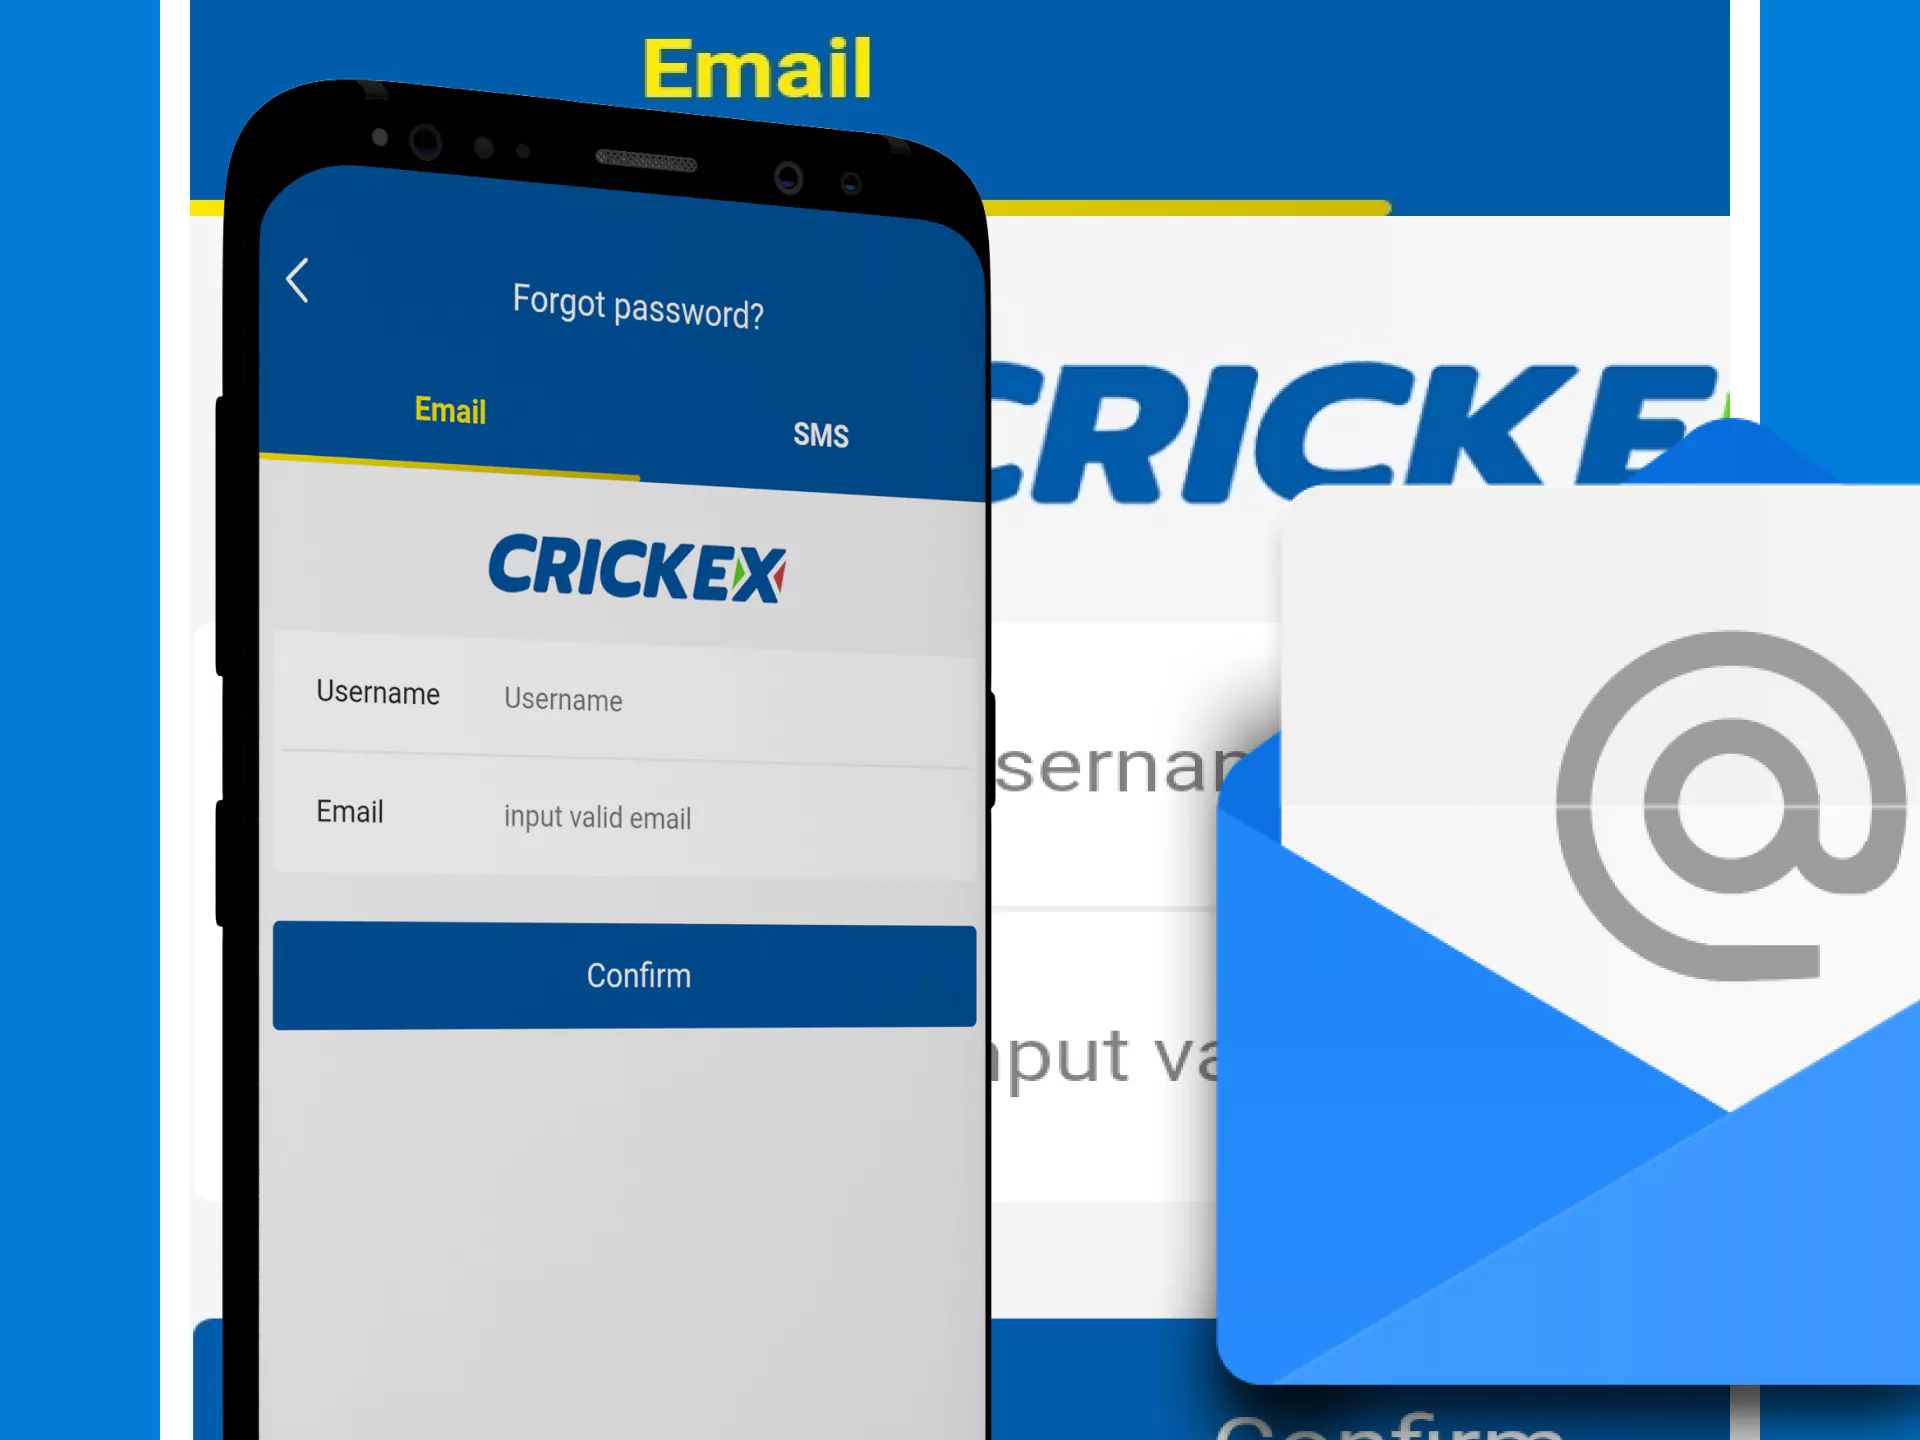 You can restore access to your Crickex account via email.